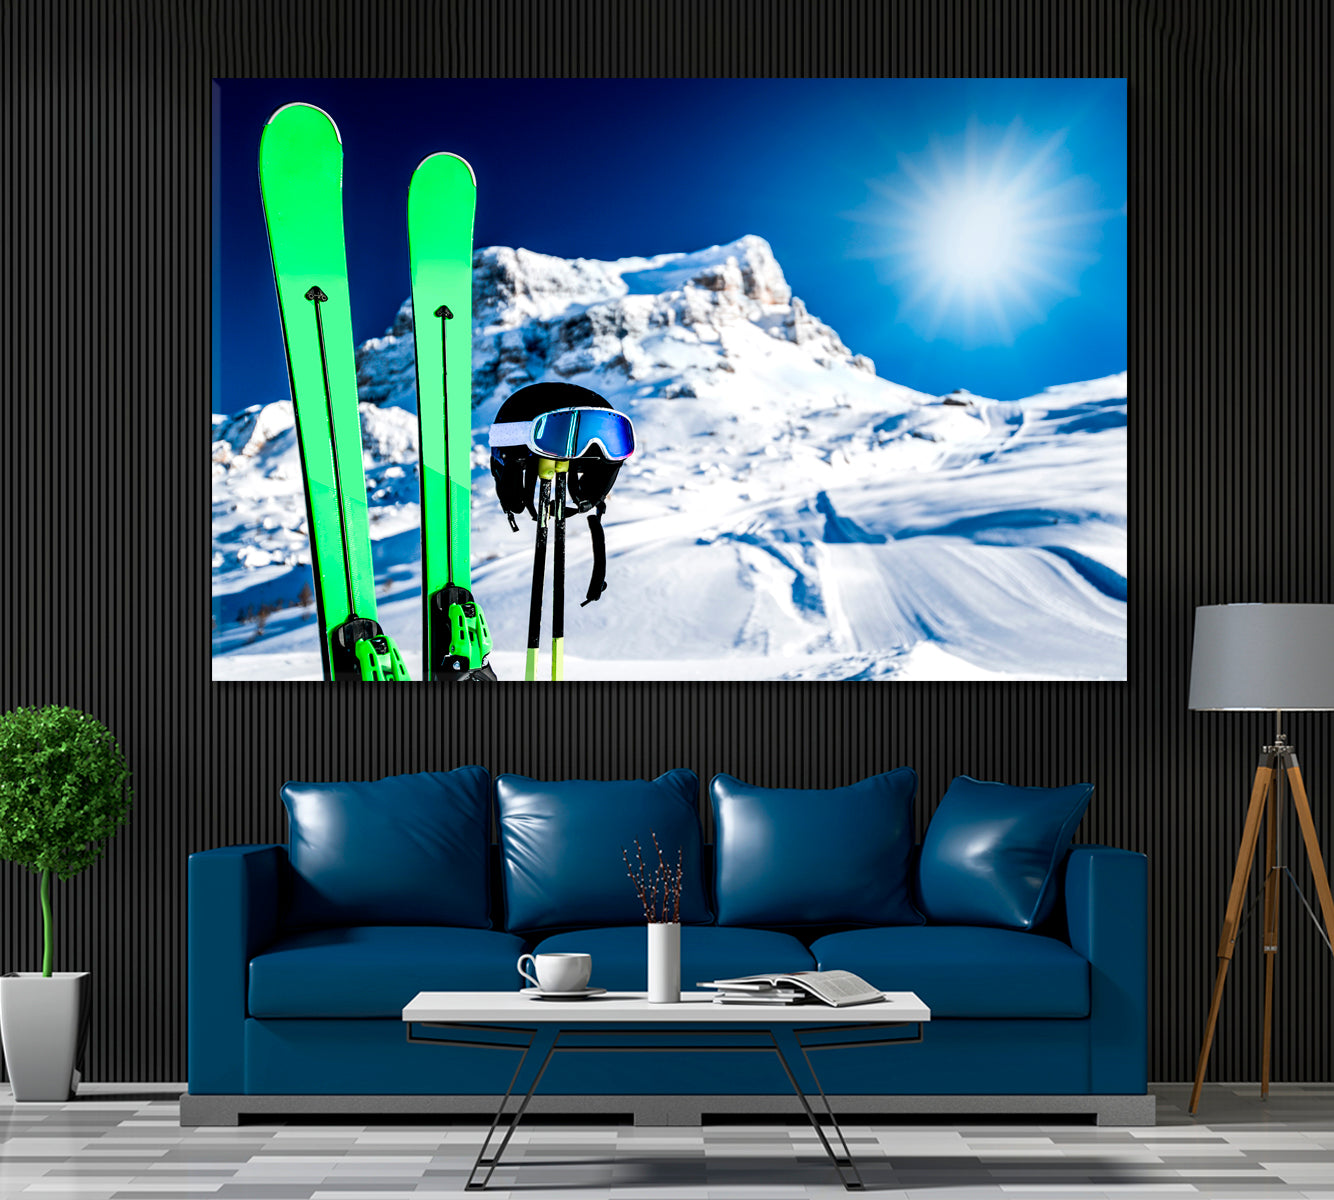 Skis in Snow Canvas Print ArtLexy 1 Panel 24"x16" inches 